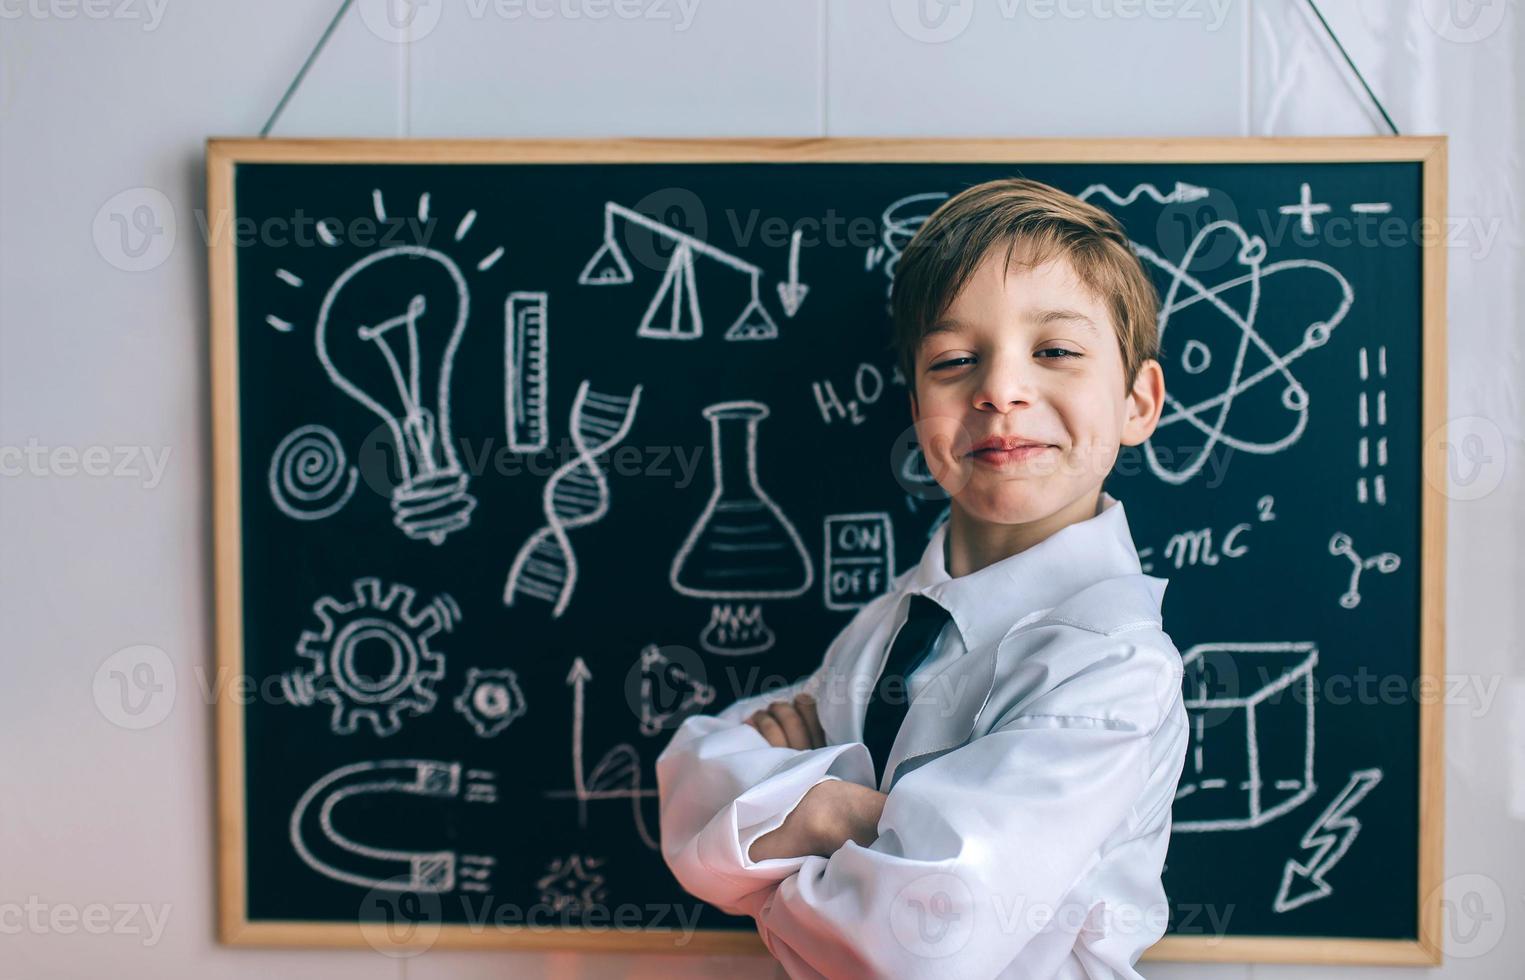 Smiling kid looking at camera in front of blackboard photo